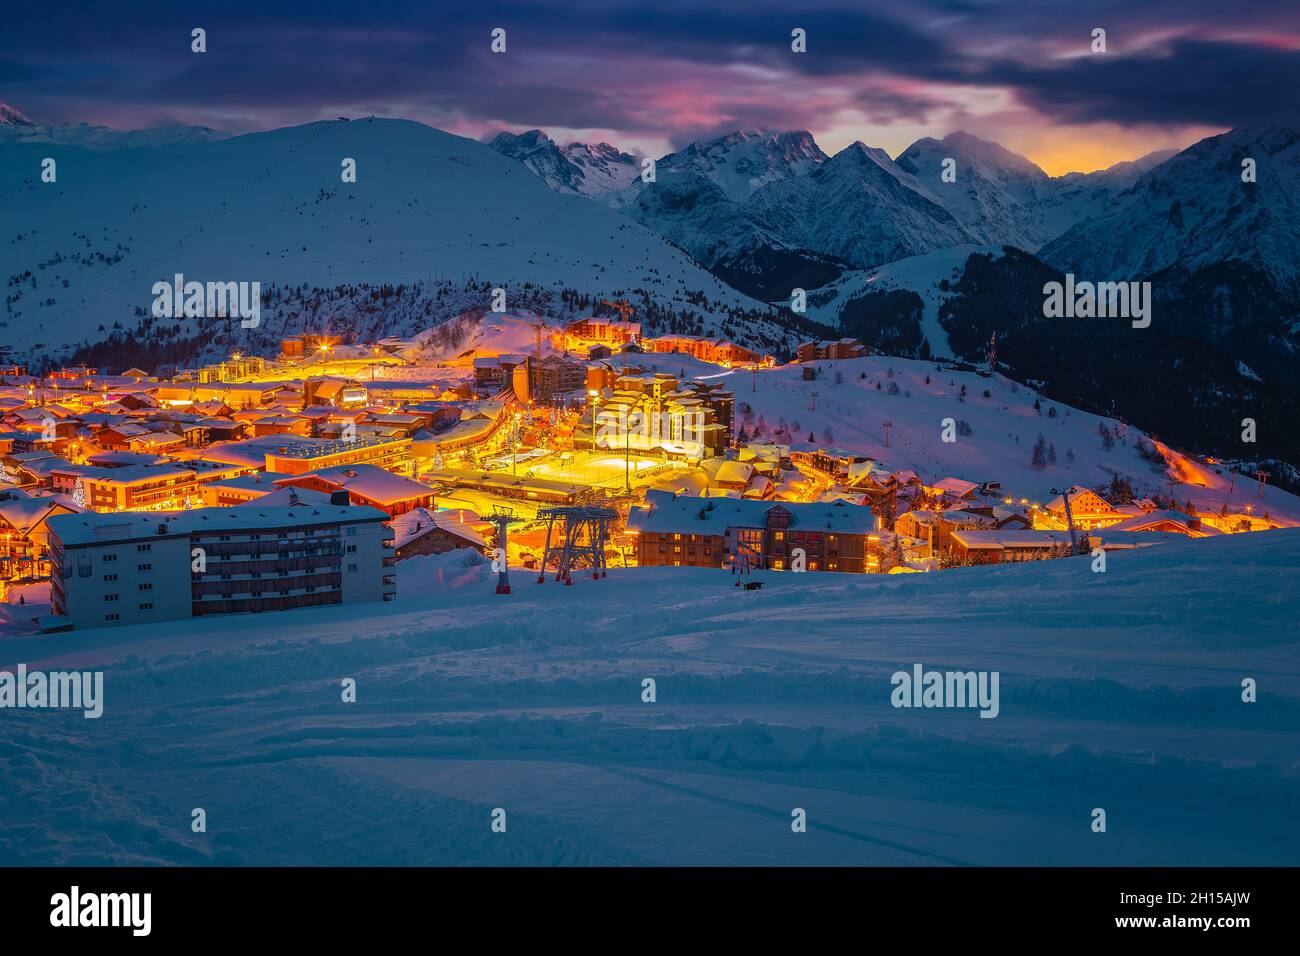 Great winter ski resort and cityscape at evening after sunset. One of the most beautiful winter travel destination, Alpe d Huez, Rhone Alps, France, E Stock Photo